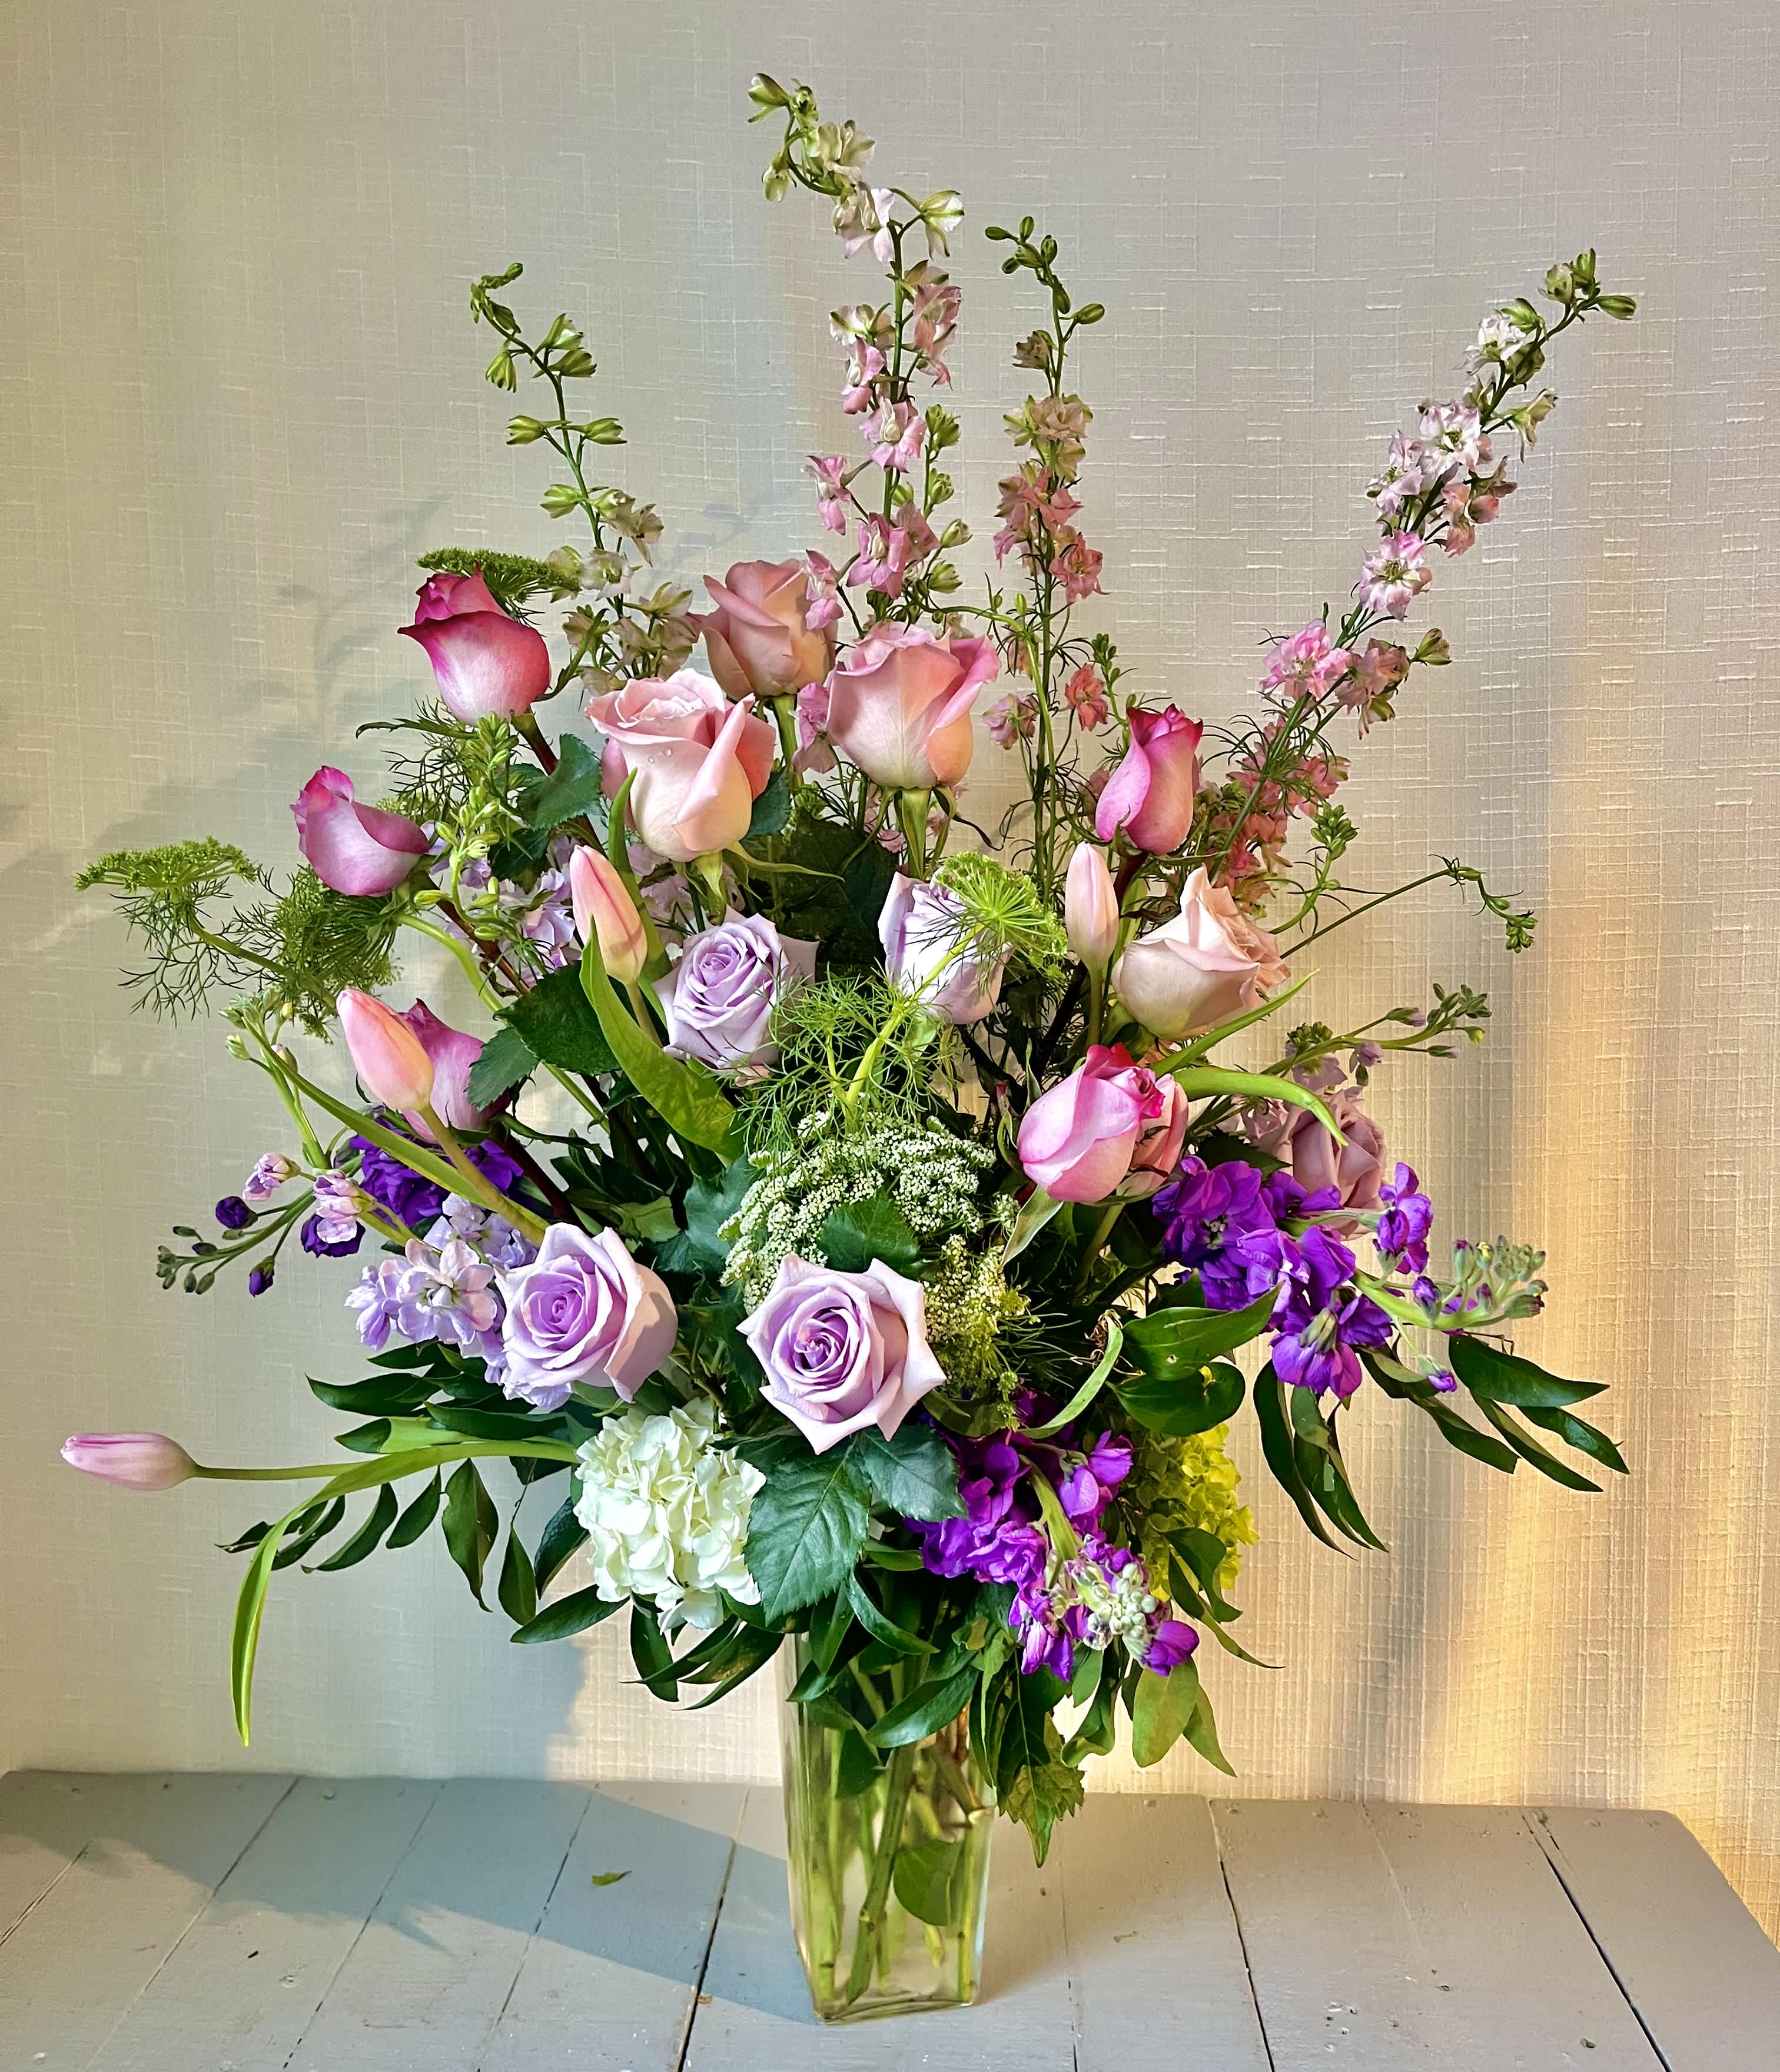 Purple Delight - &quot;Purple Delight&quot; is a lush collection of purple and white flowers with foliage designed in a clear vase.  For even more of an impact, allow us to upgrade your design to a Deluxe or Premium version, which will feature a larger quantity of stems and larger vase.  *Content may vary*